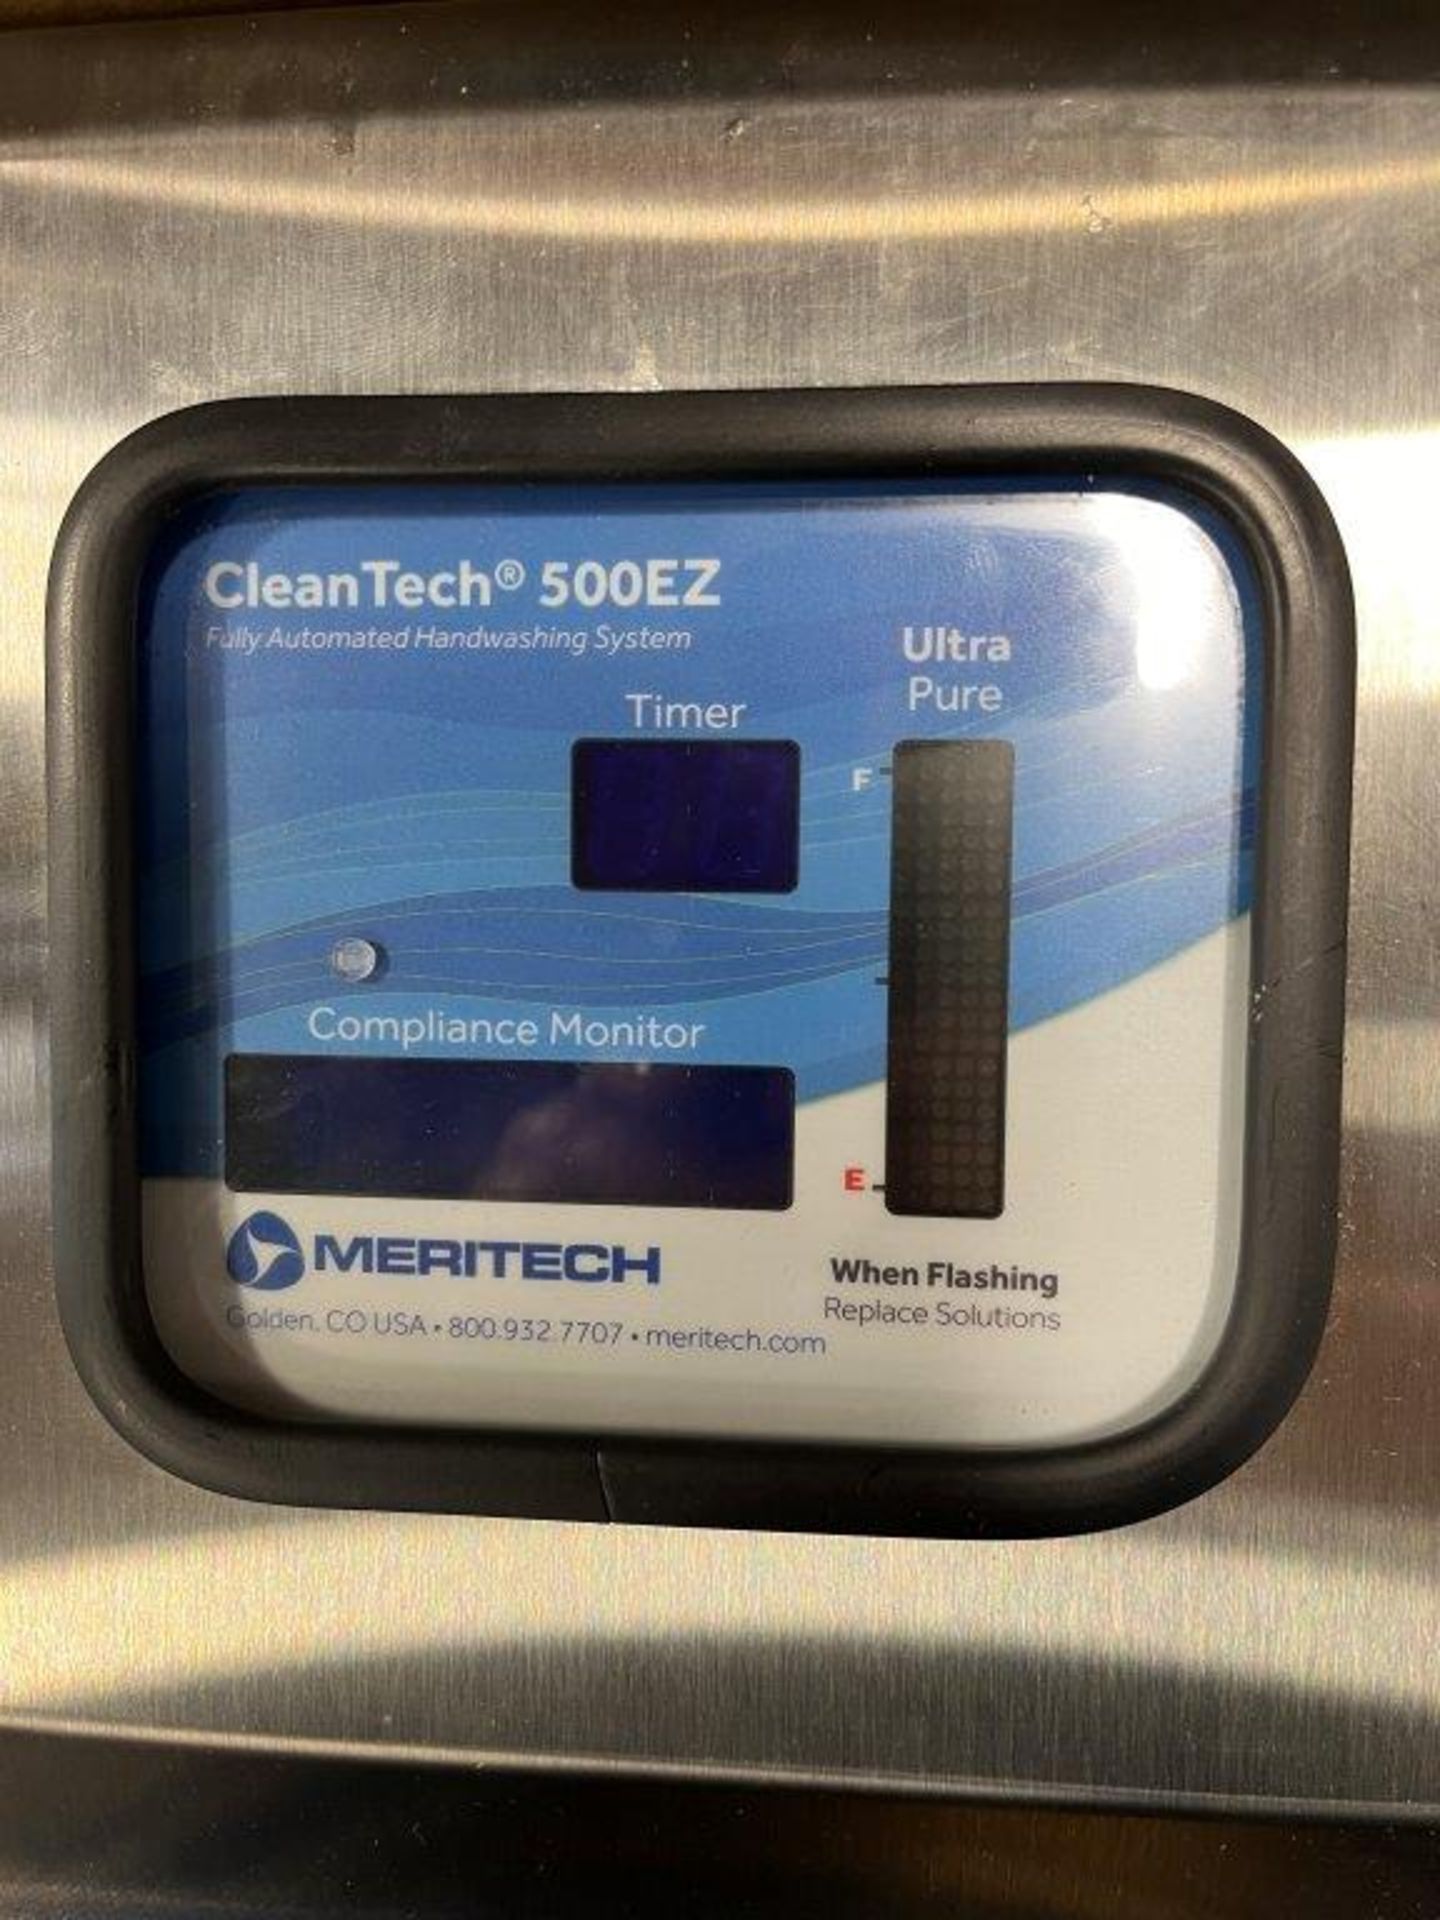 (New) Meritech Clean Tech 500EZ Fully Automated Handwashing System - Image 2 of 2